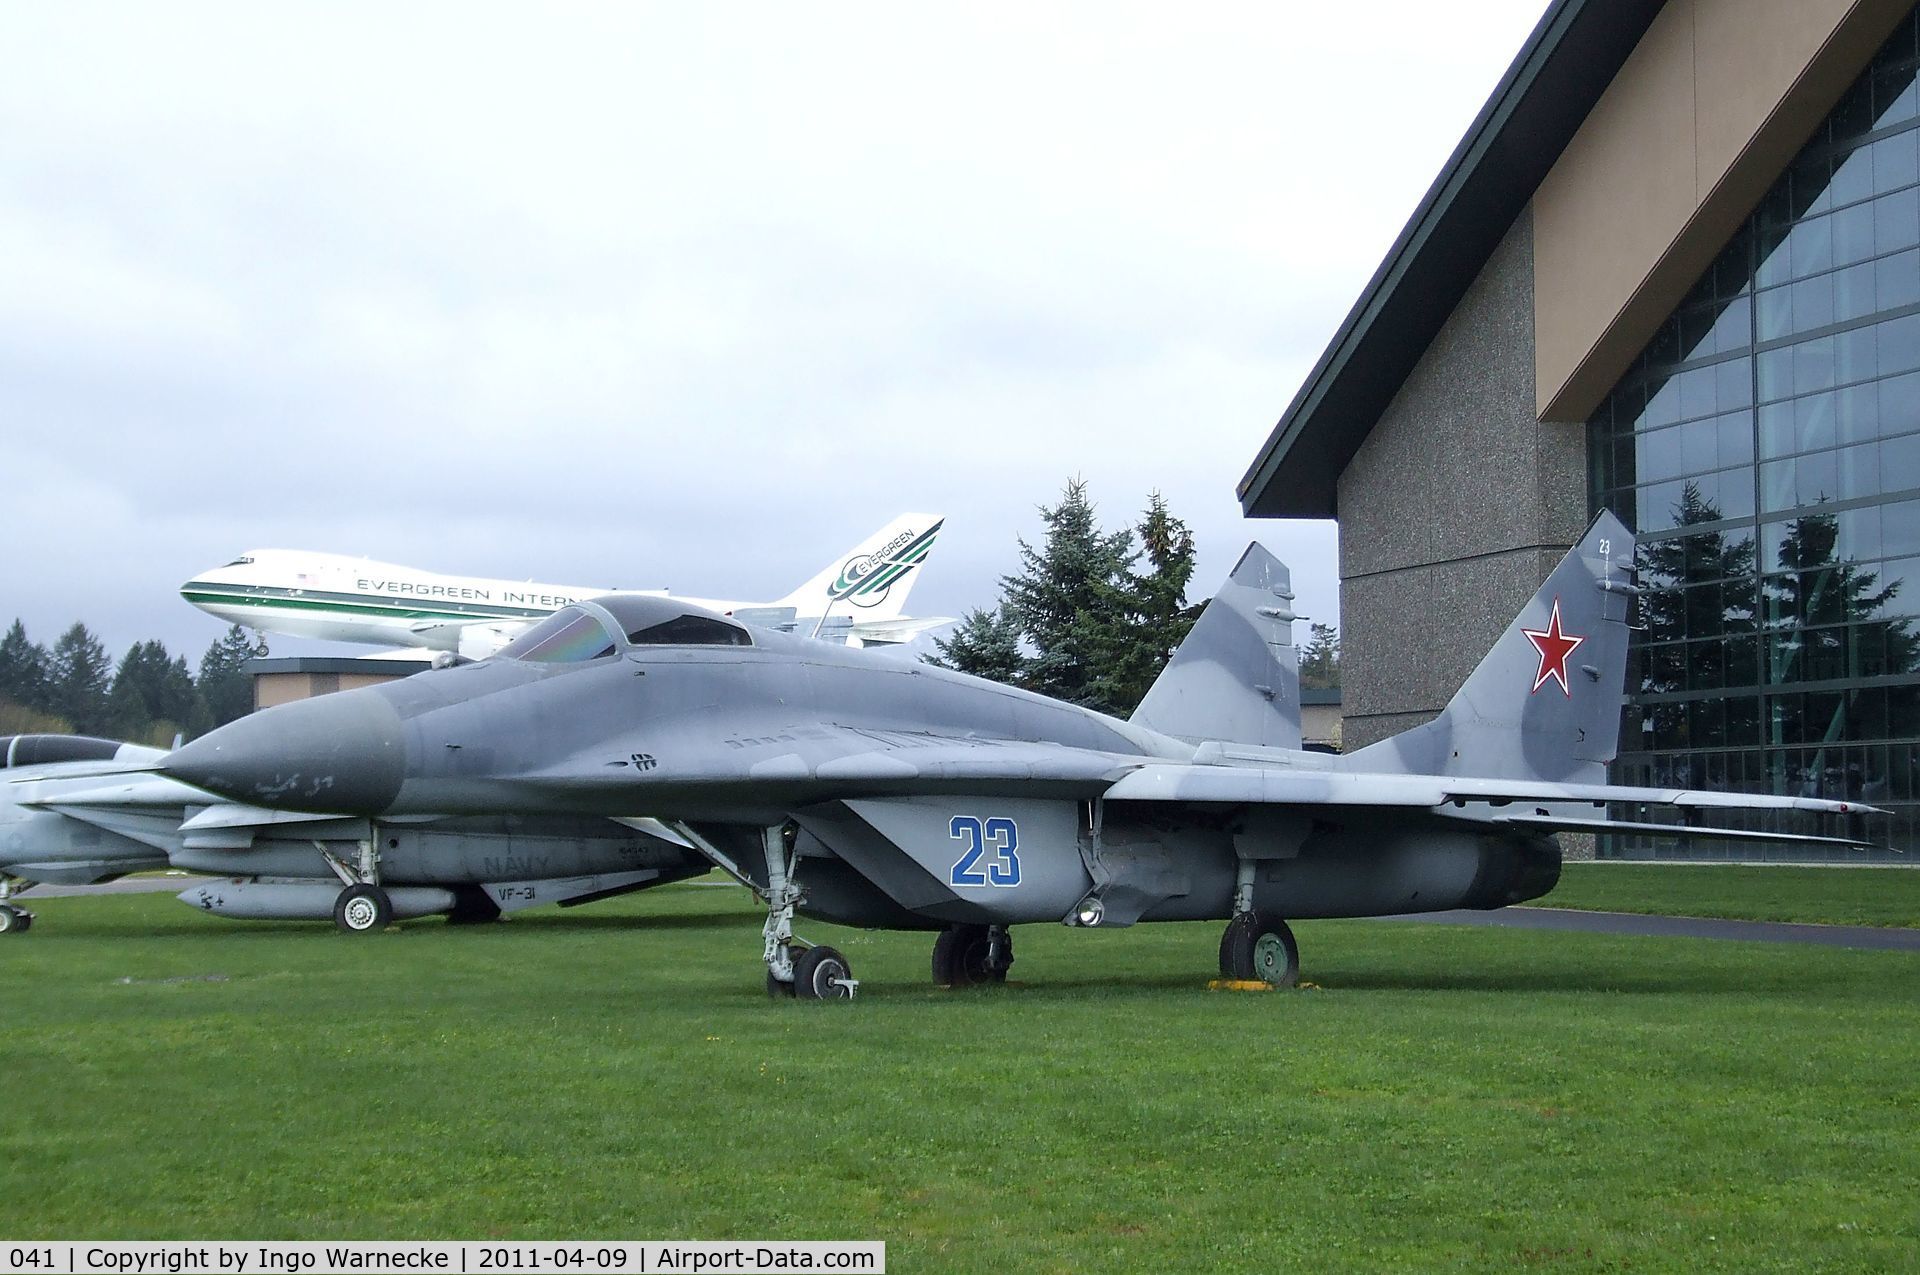 041, Mikoyan-Gurevich MiG-29 C/N 2960721930, Mikoyan i Gurevich MiG-29 FULCRUM at the Evergreen Aviation & Space Museum, McMinnville OR